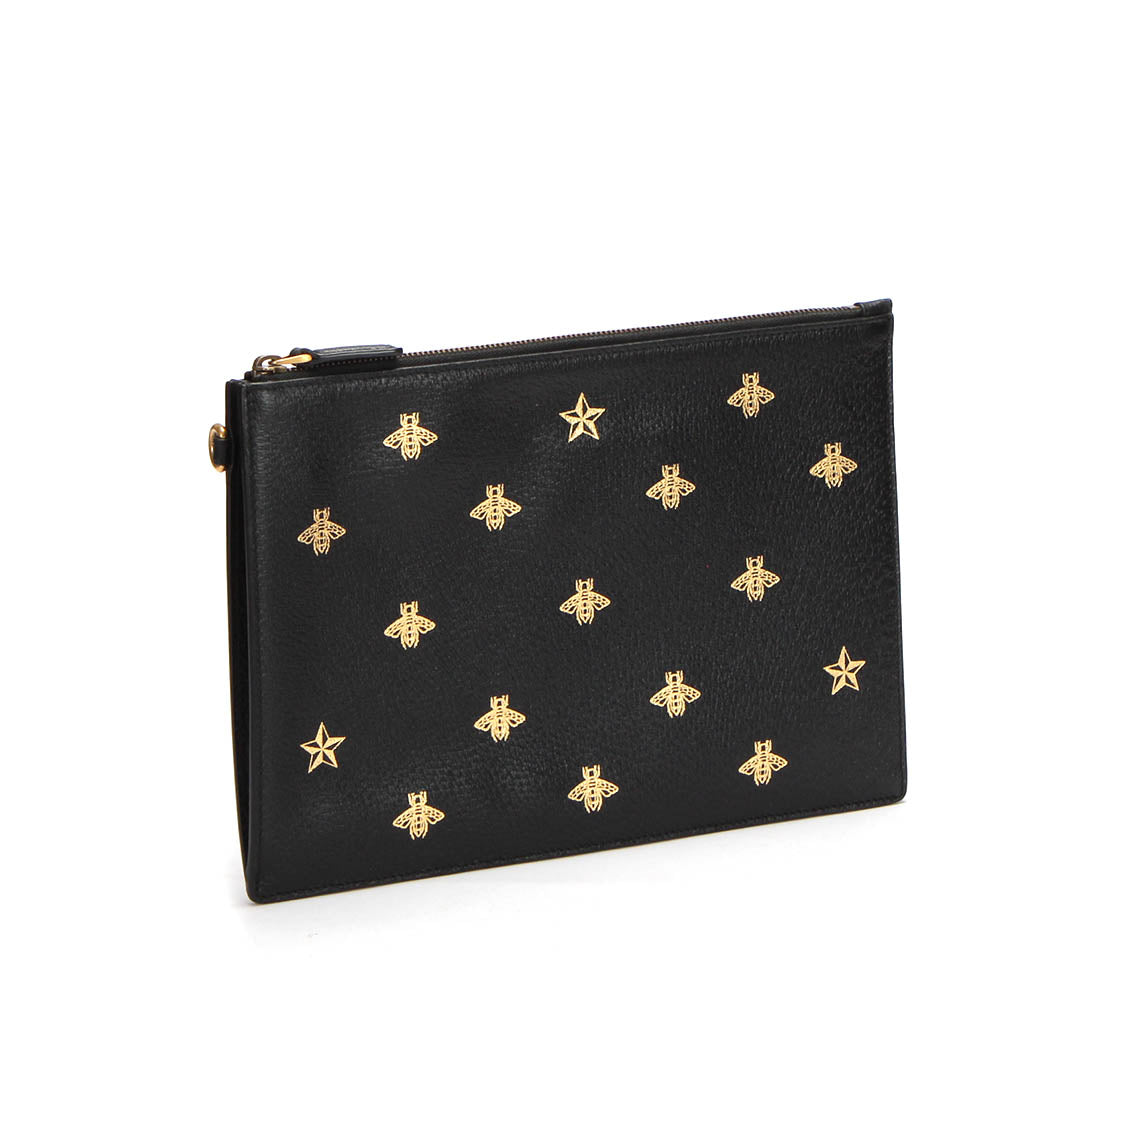 Leather Bees & Stars Print Large Clutch 495066